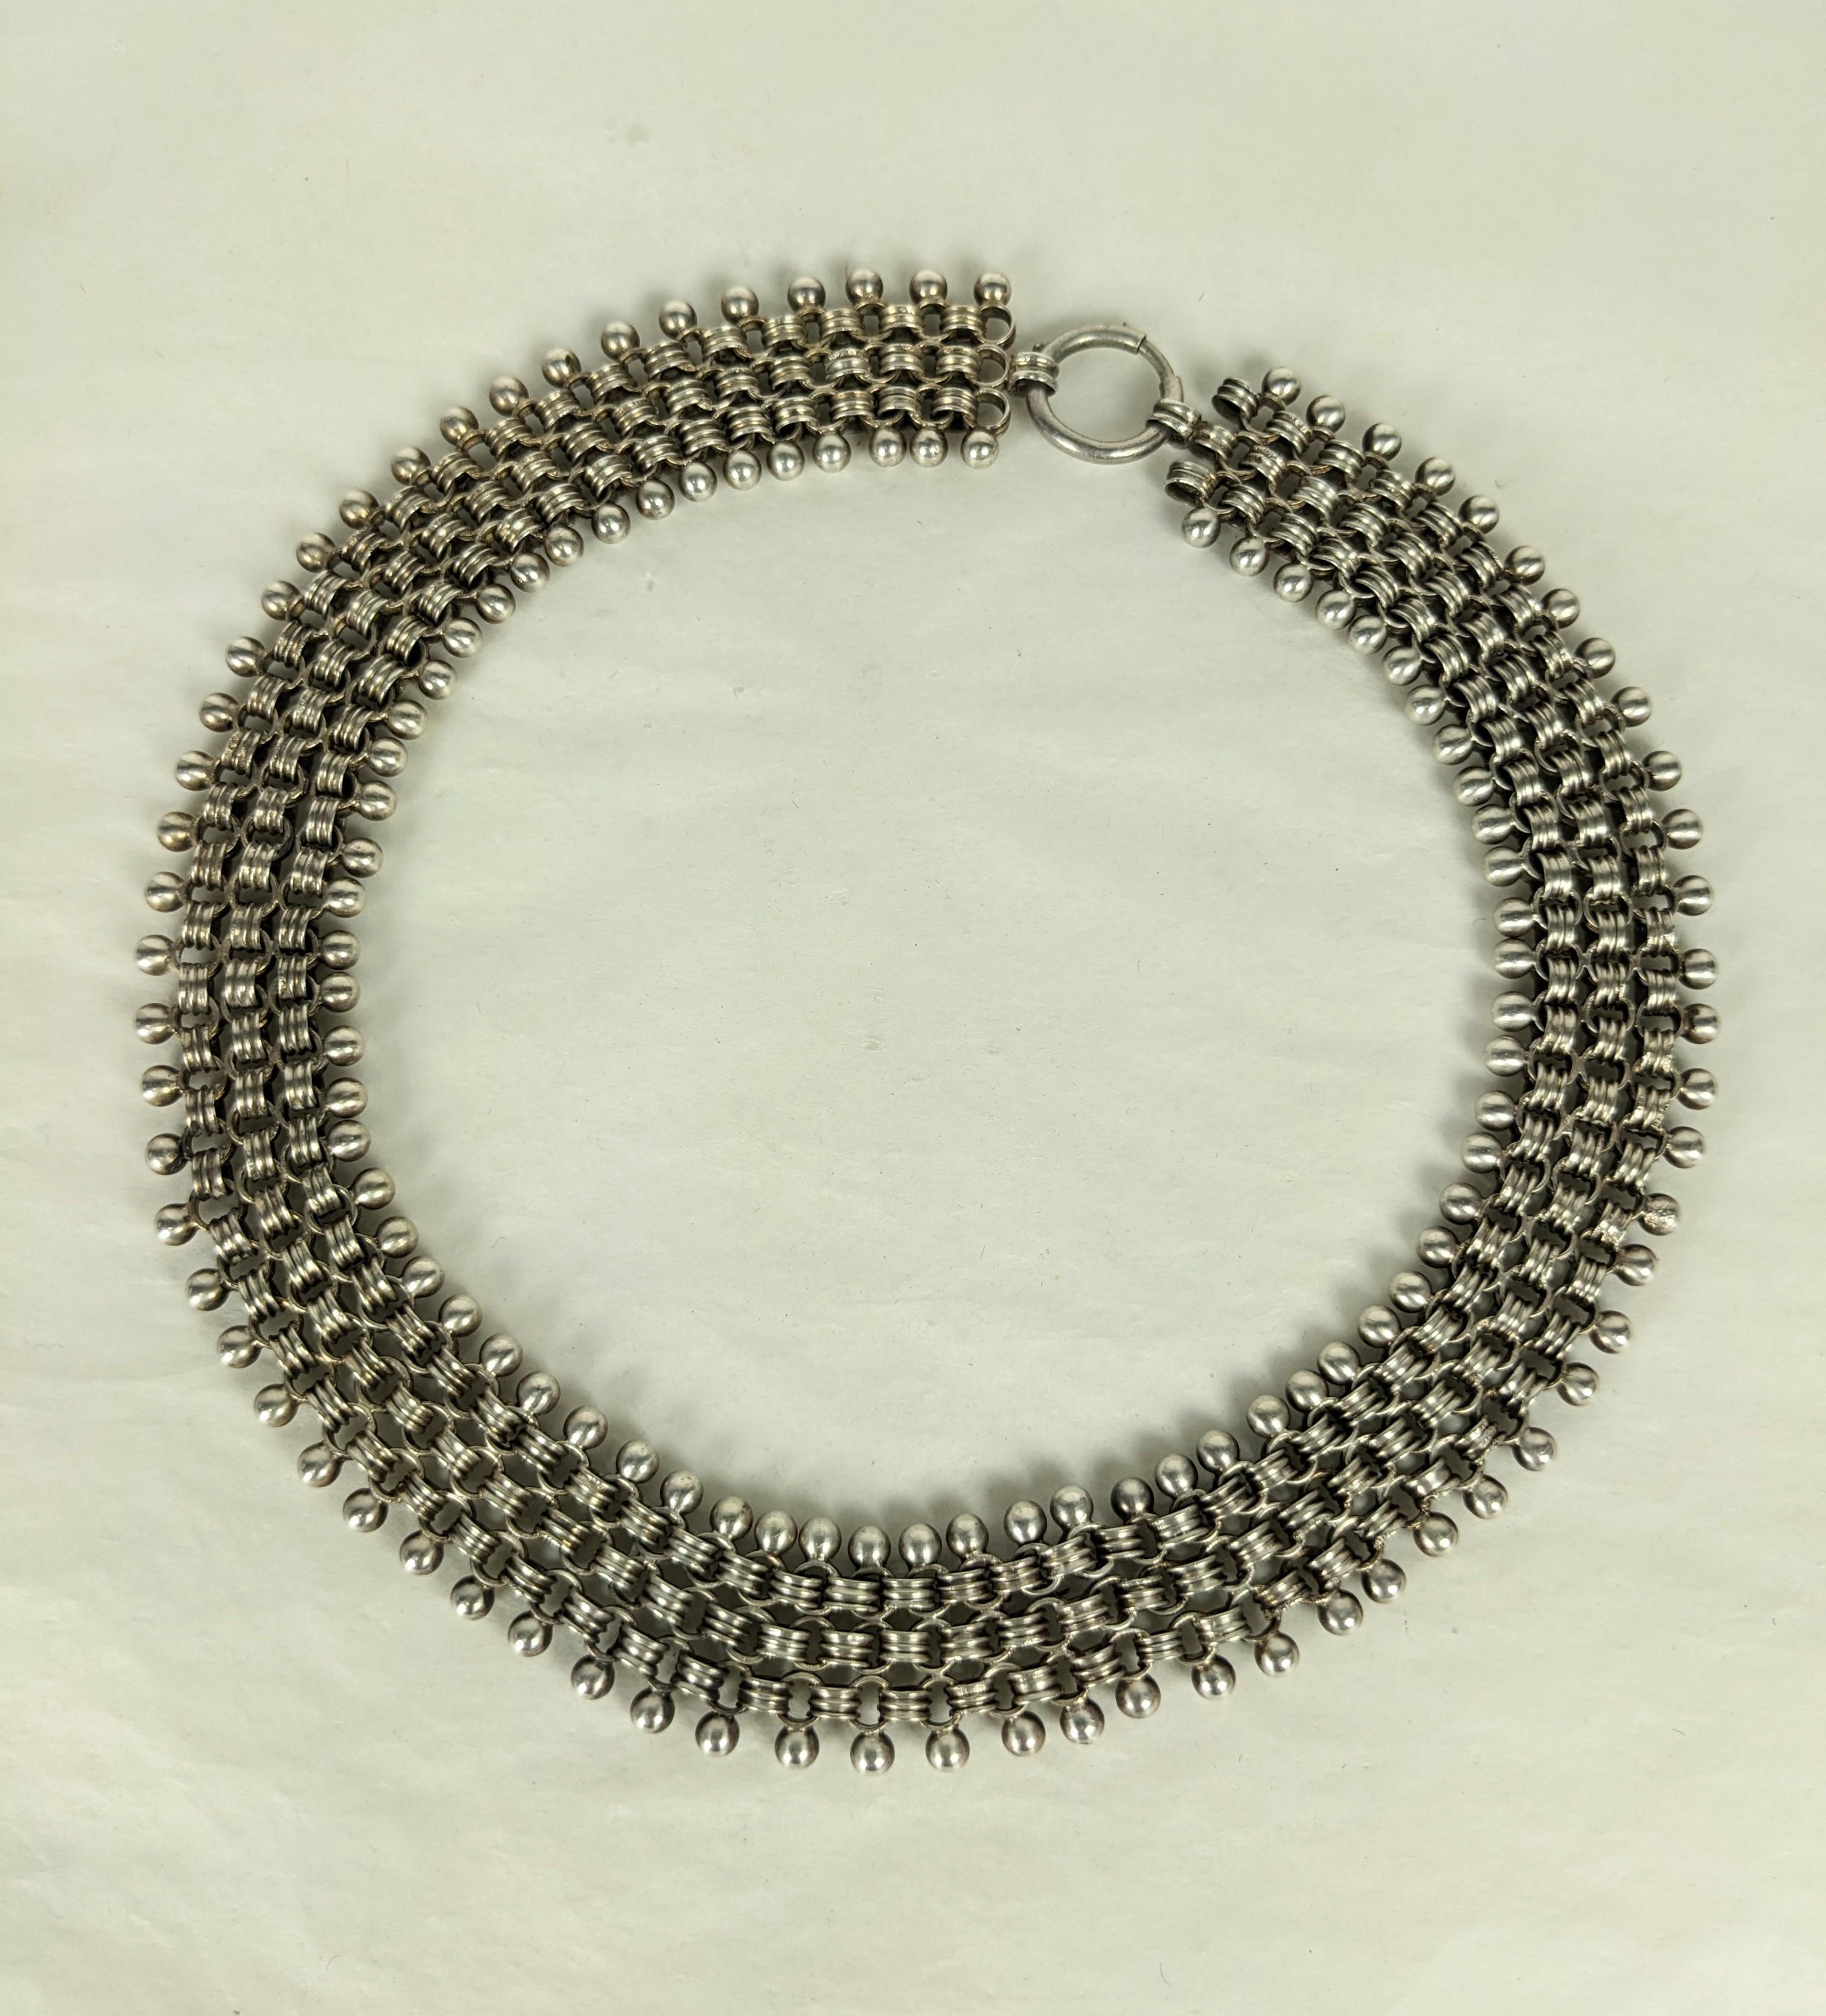 Elegant Victorian Silver Mesh Link Necklace from the late 19th Century. Flexible hand made links with ball trim with large original clasp. 
1880's. 17